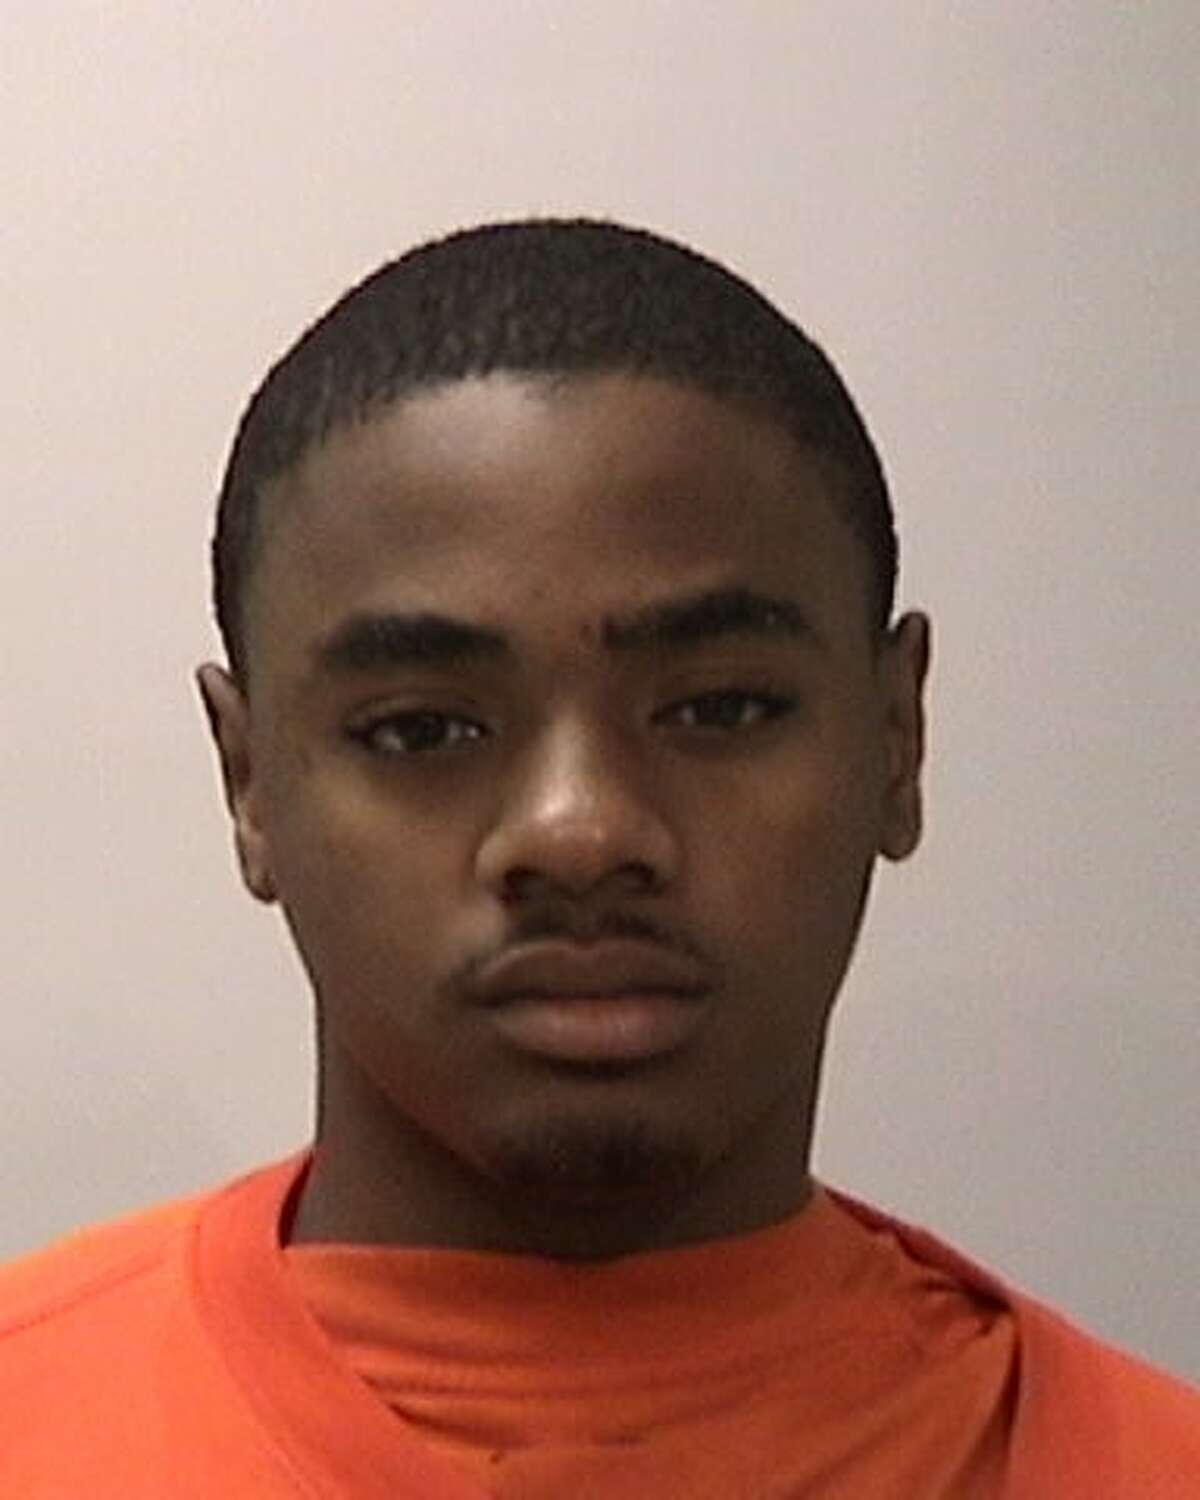 Lamar Akeli Fontenot, 19, of Antioch, was charged with: robbery, conspiracy, possession of stolen property, possession of a burglary tool and firearms charges in connection with an alleged armed robbery in San Francisco's Russian Hill on June, 25, 2016. 